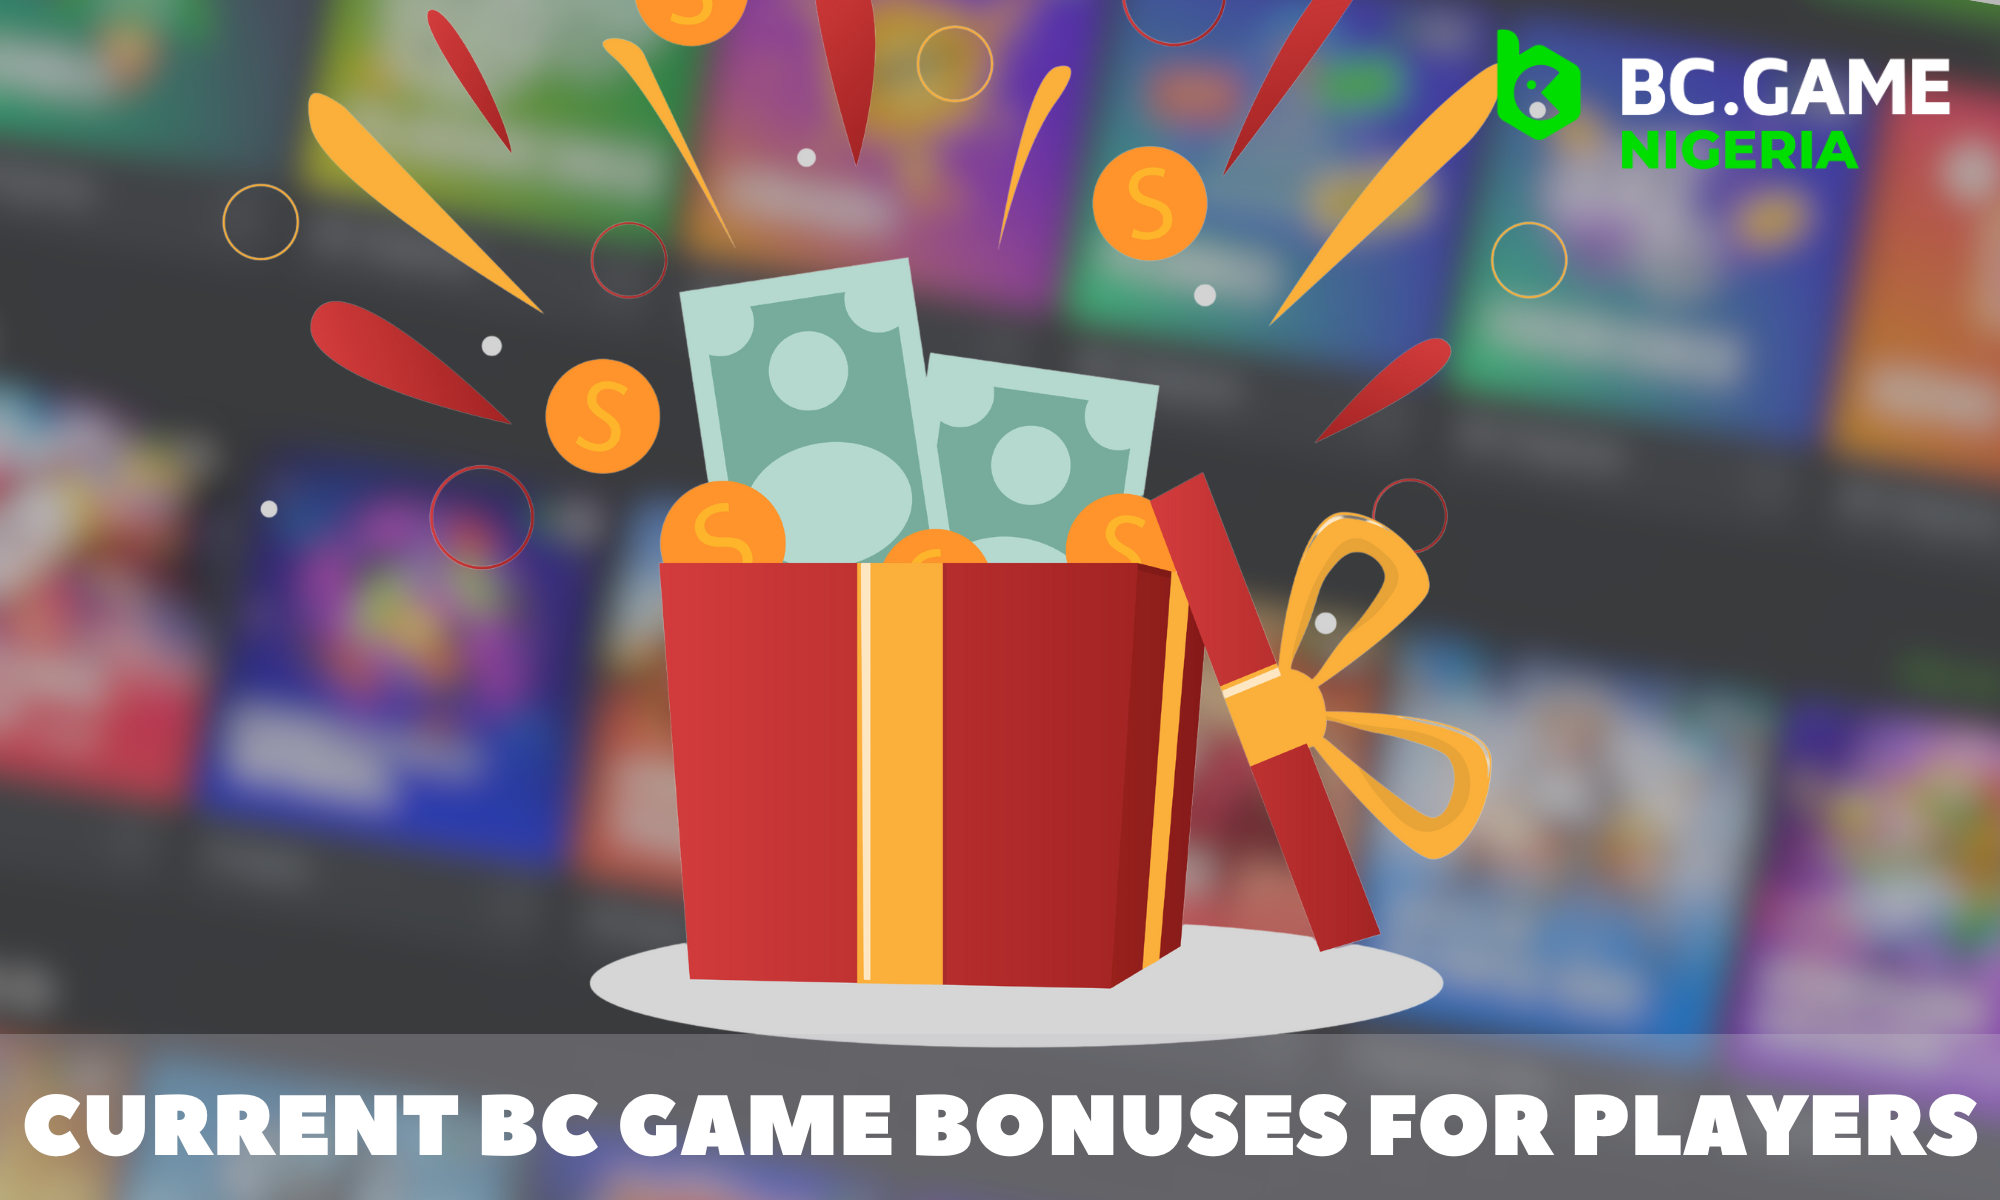 Overview of current BC Game bonuses and promotions